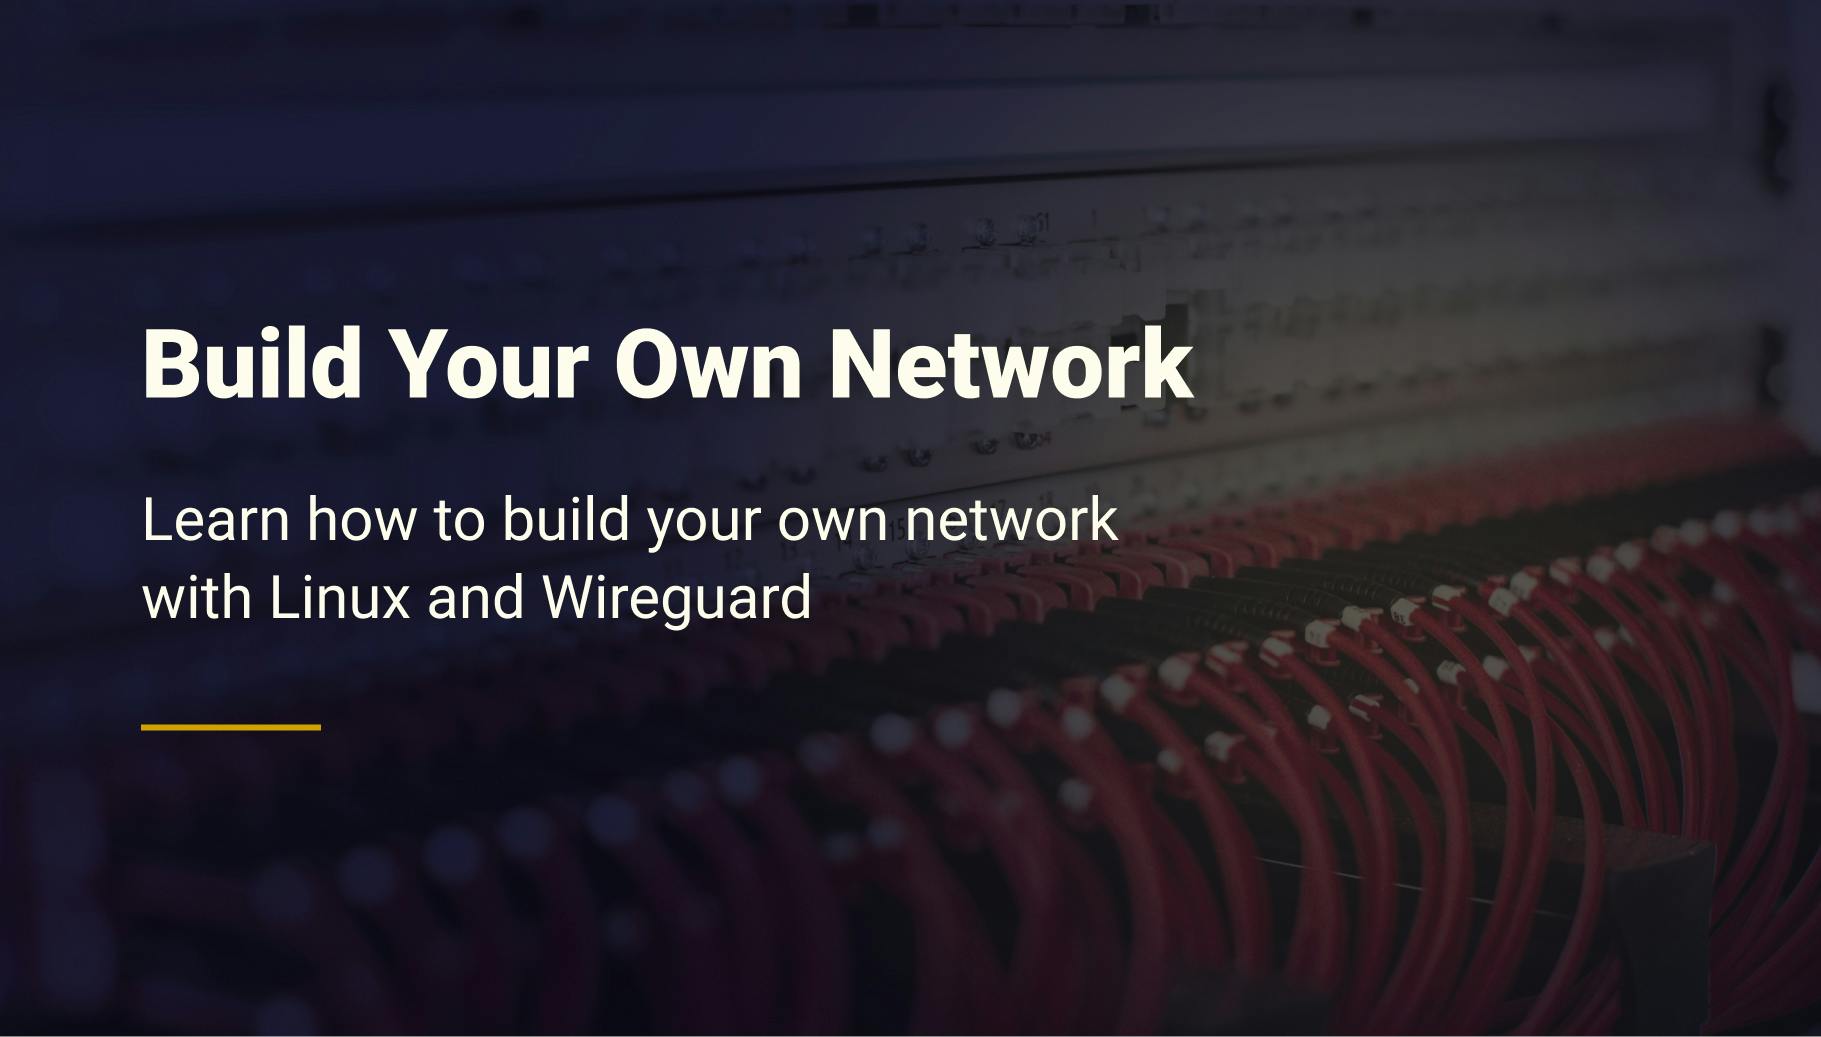 Build Your Own Network with Linux and Wireguard - Qovery